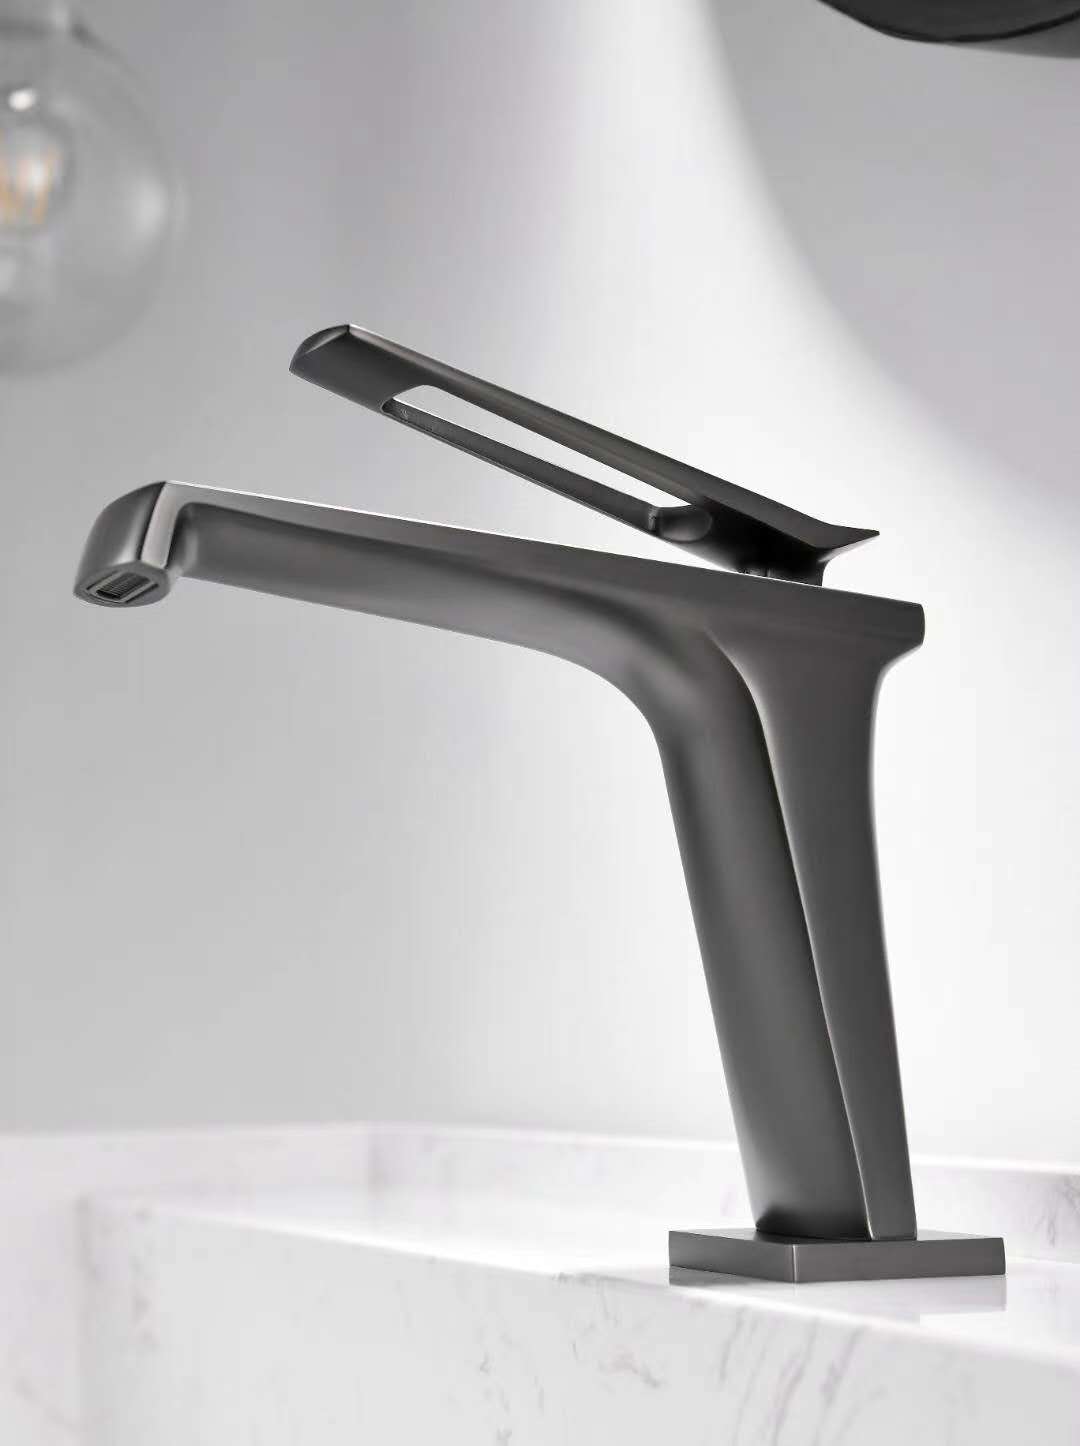 CBM sink faucet waterfall check now for home-1